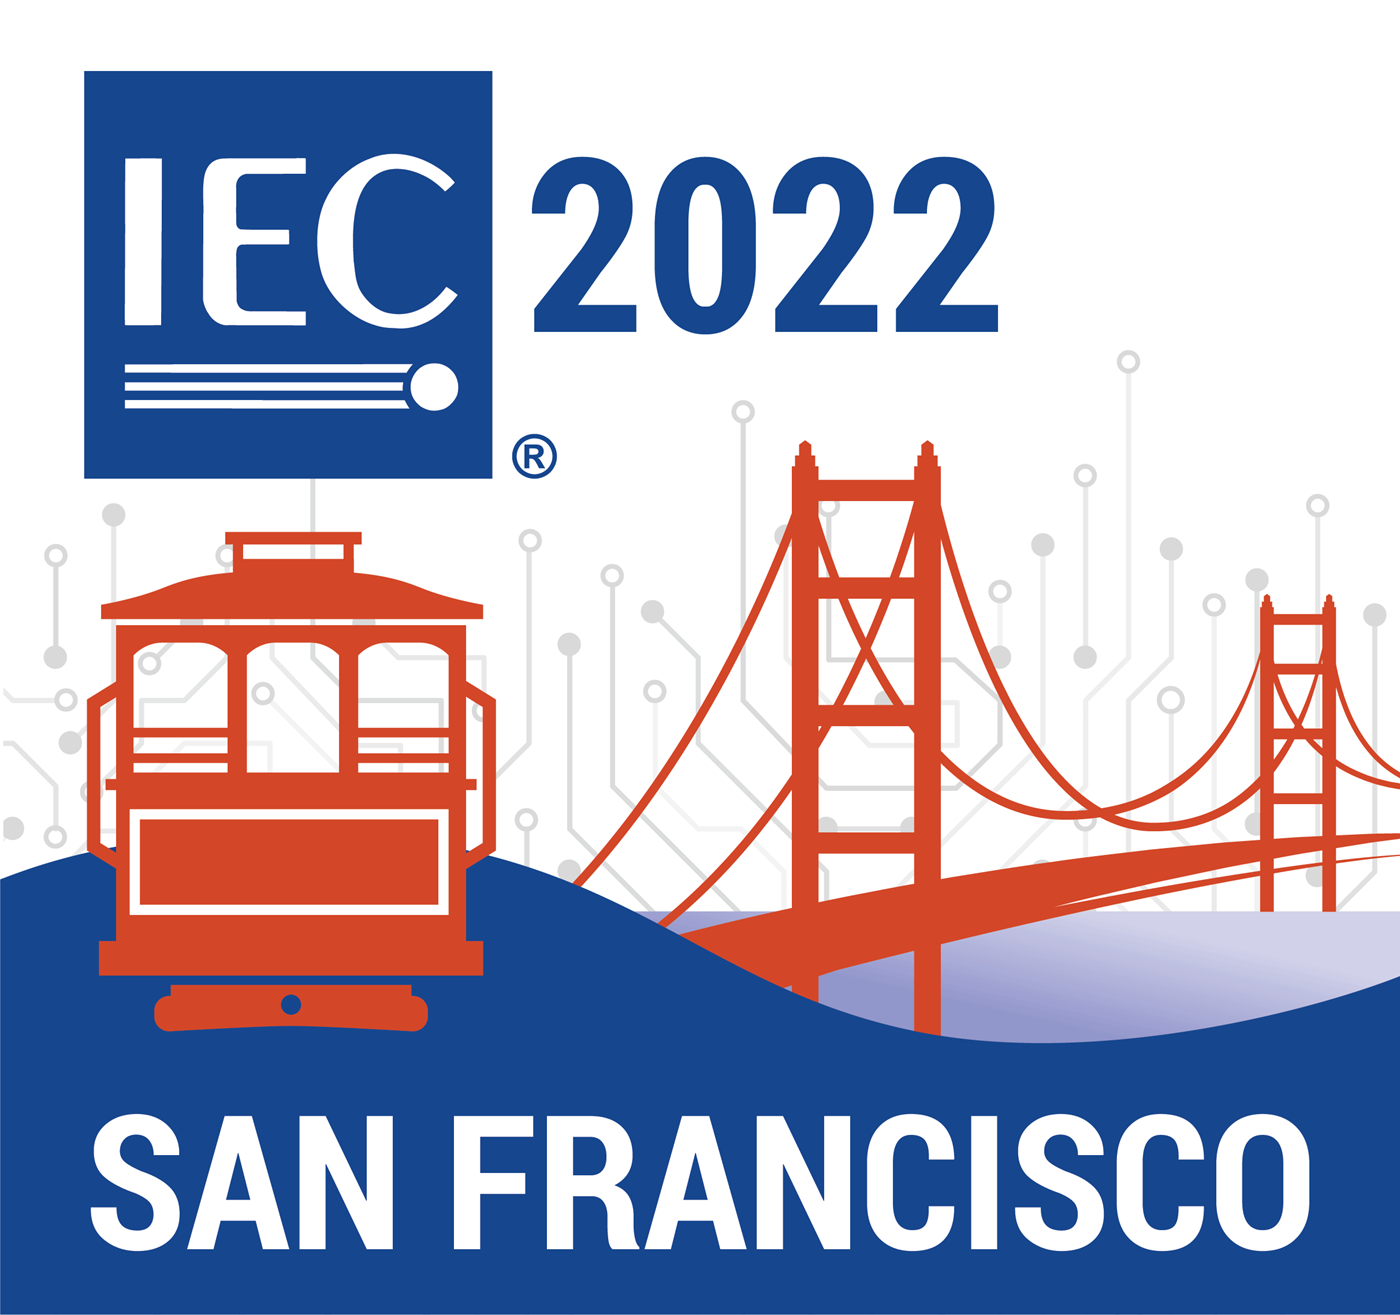 Graphic logo for the IEC 2022 General Meeting in San Francisco